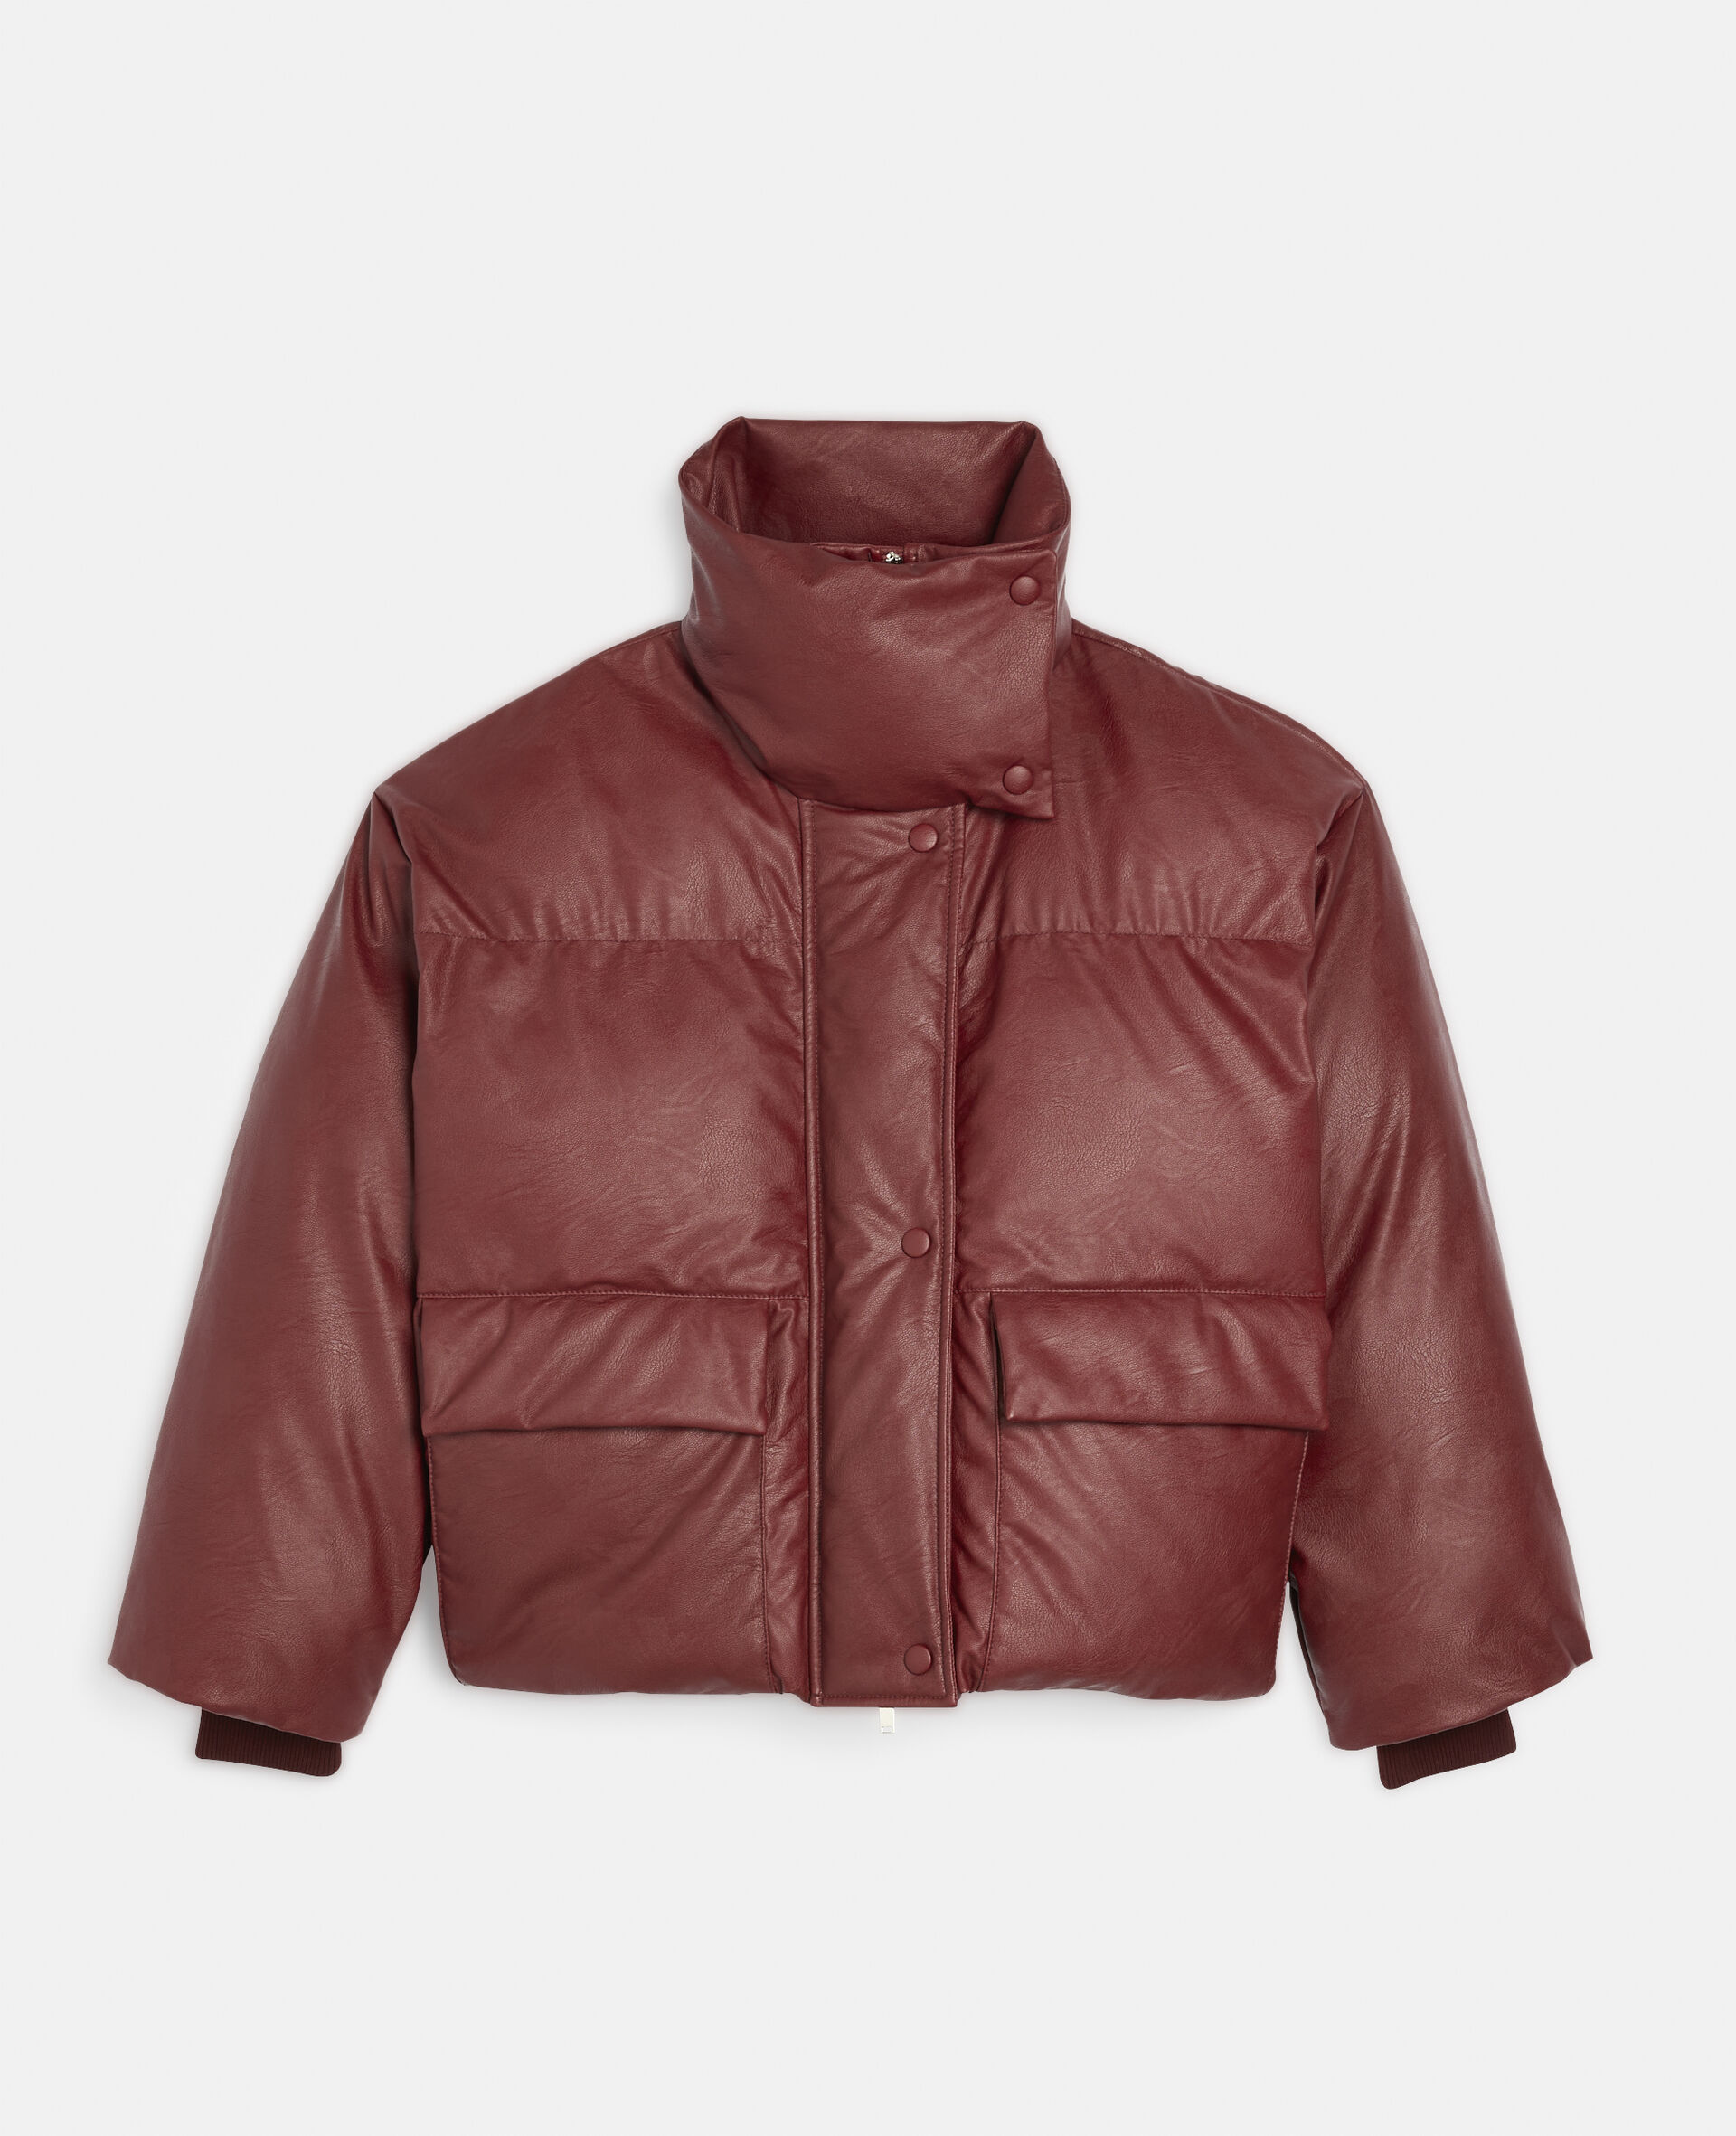 Alter Mat Puffer Jacket-Red-large